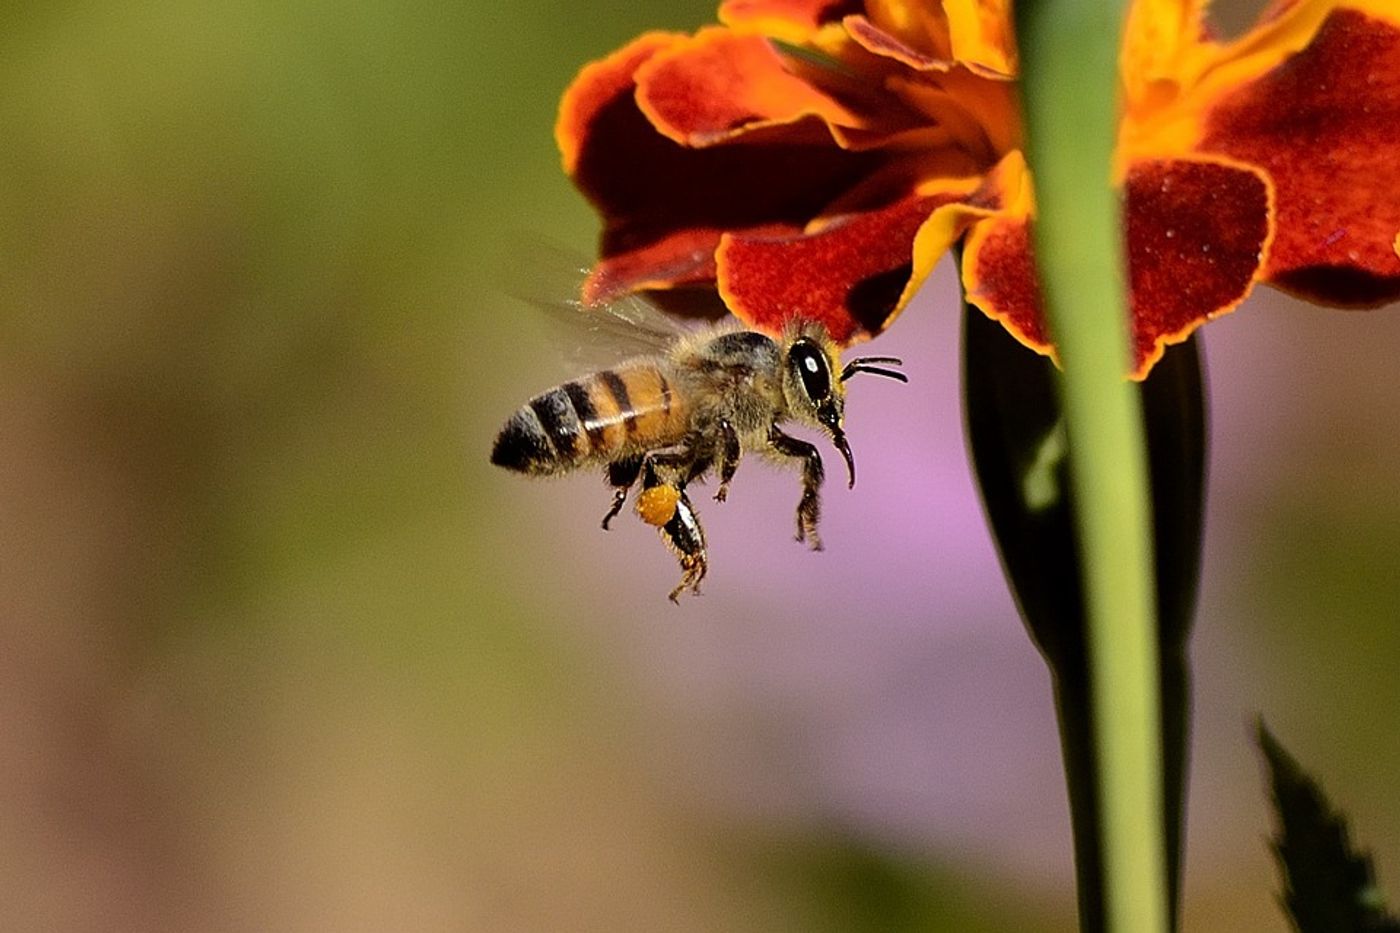 Many of the world's insects, including bees, are declining. But why?